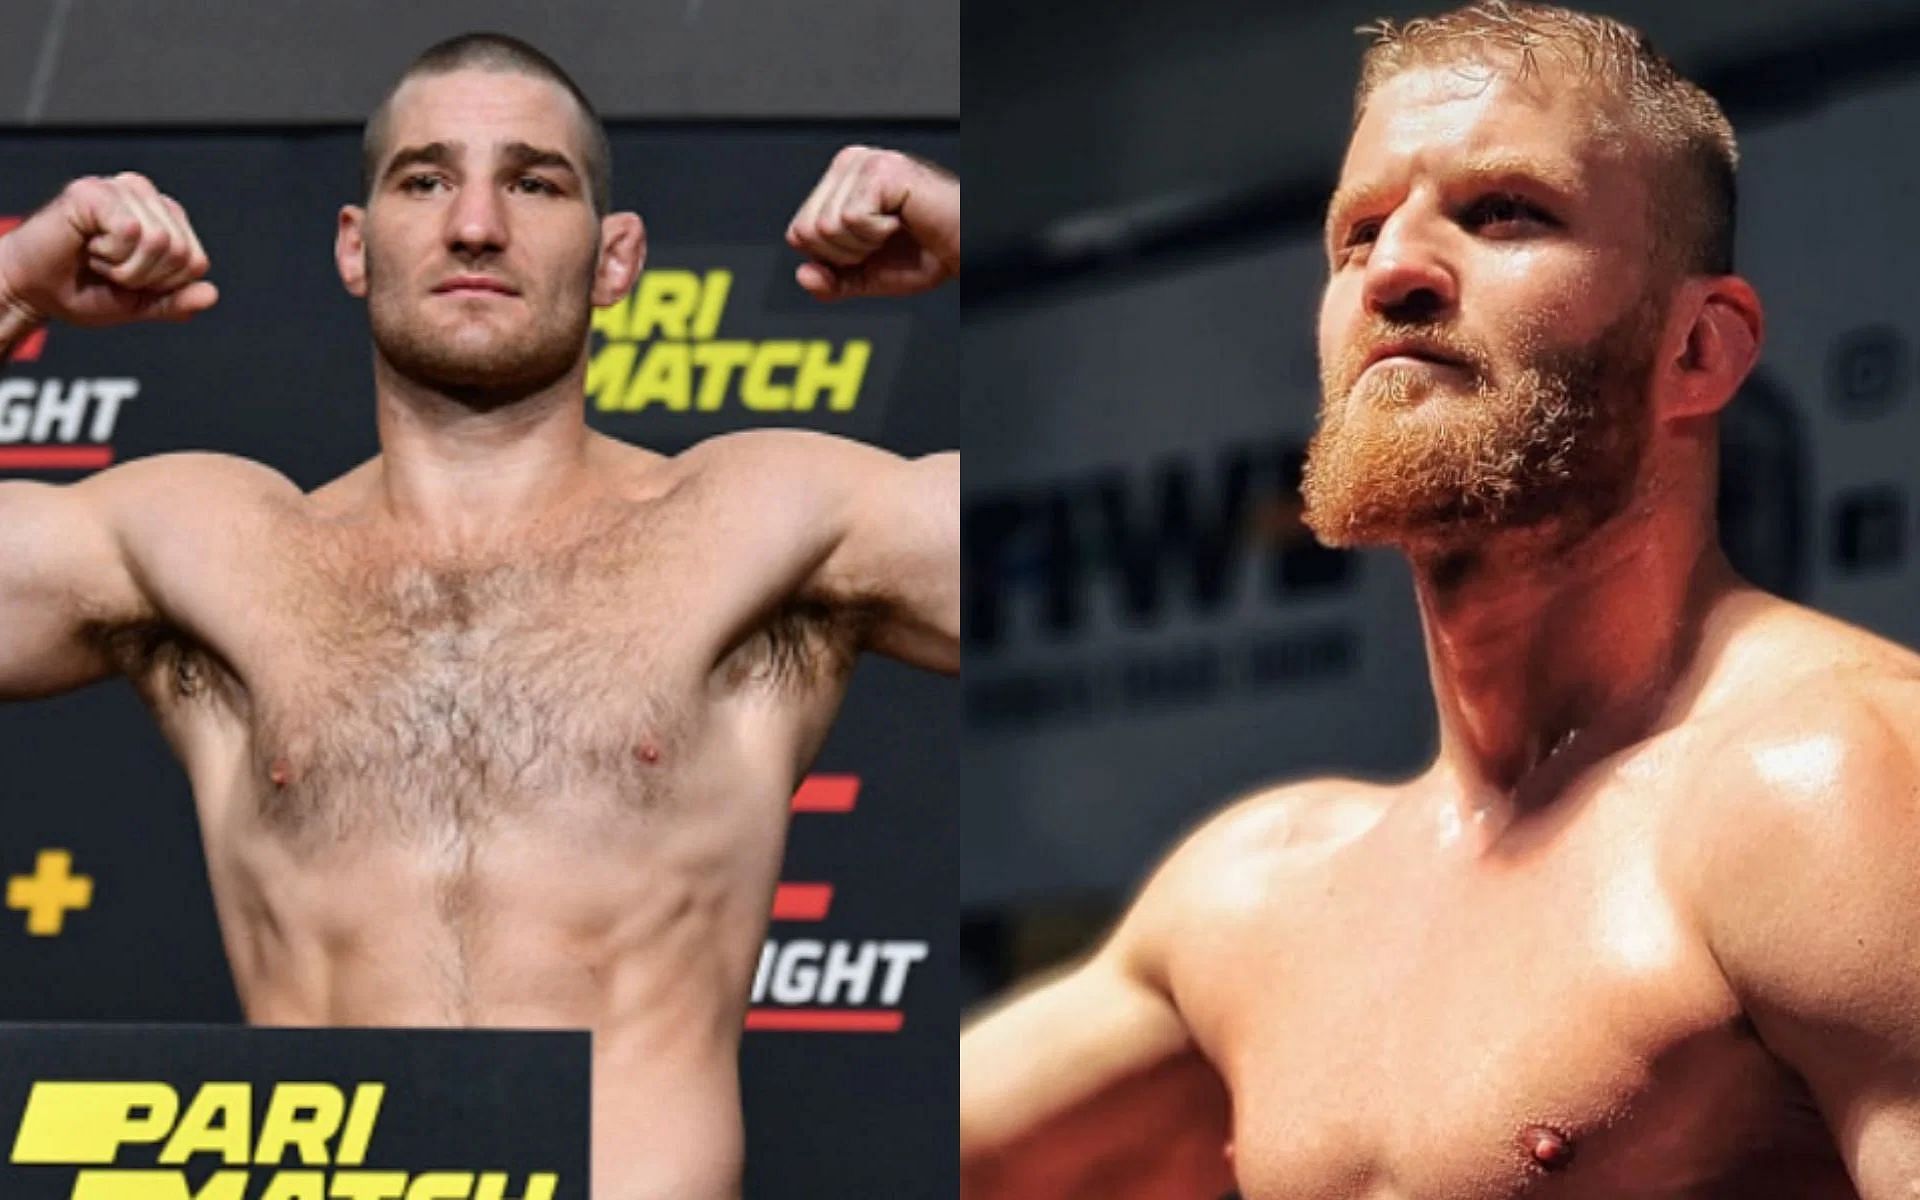 Sean Strickland (left) and Jan Blachowicz (right)